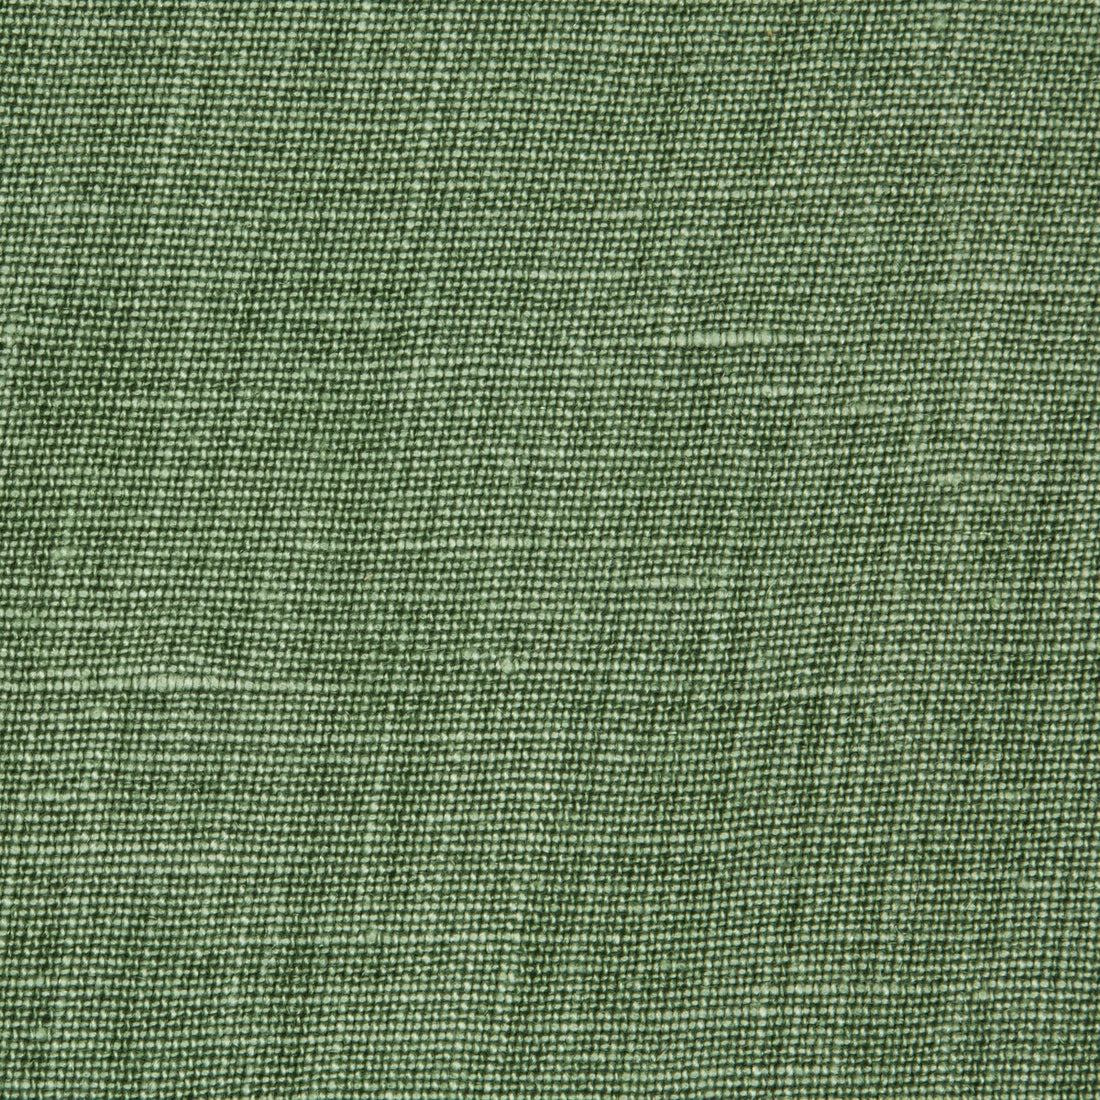 Lille Linen fabric in kelly green color - pattern 2017119.23.0 - by Lee Jofa in the Perfect Plains collection